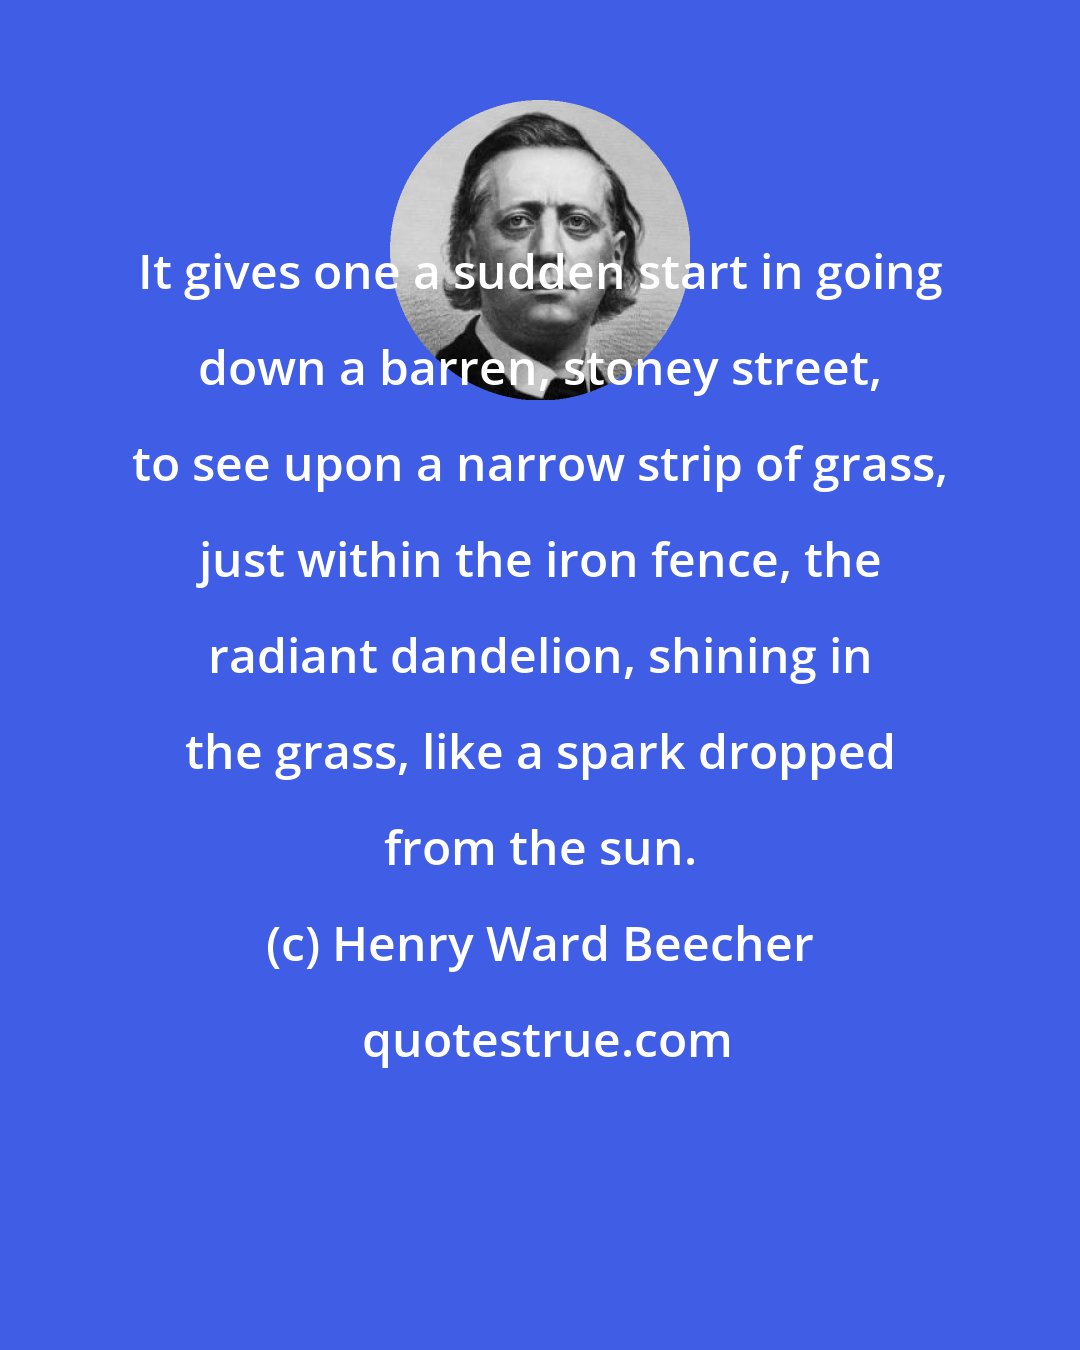 Henry Ward Beecher: It gives one a sudden start in going down a barren, stoney street, to see upon a narrow strip of grass, just within the iron fence, the radiant dandelion, shining in the grass, like a spark dropped from the sun.